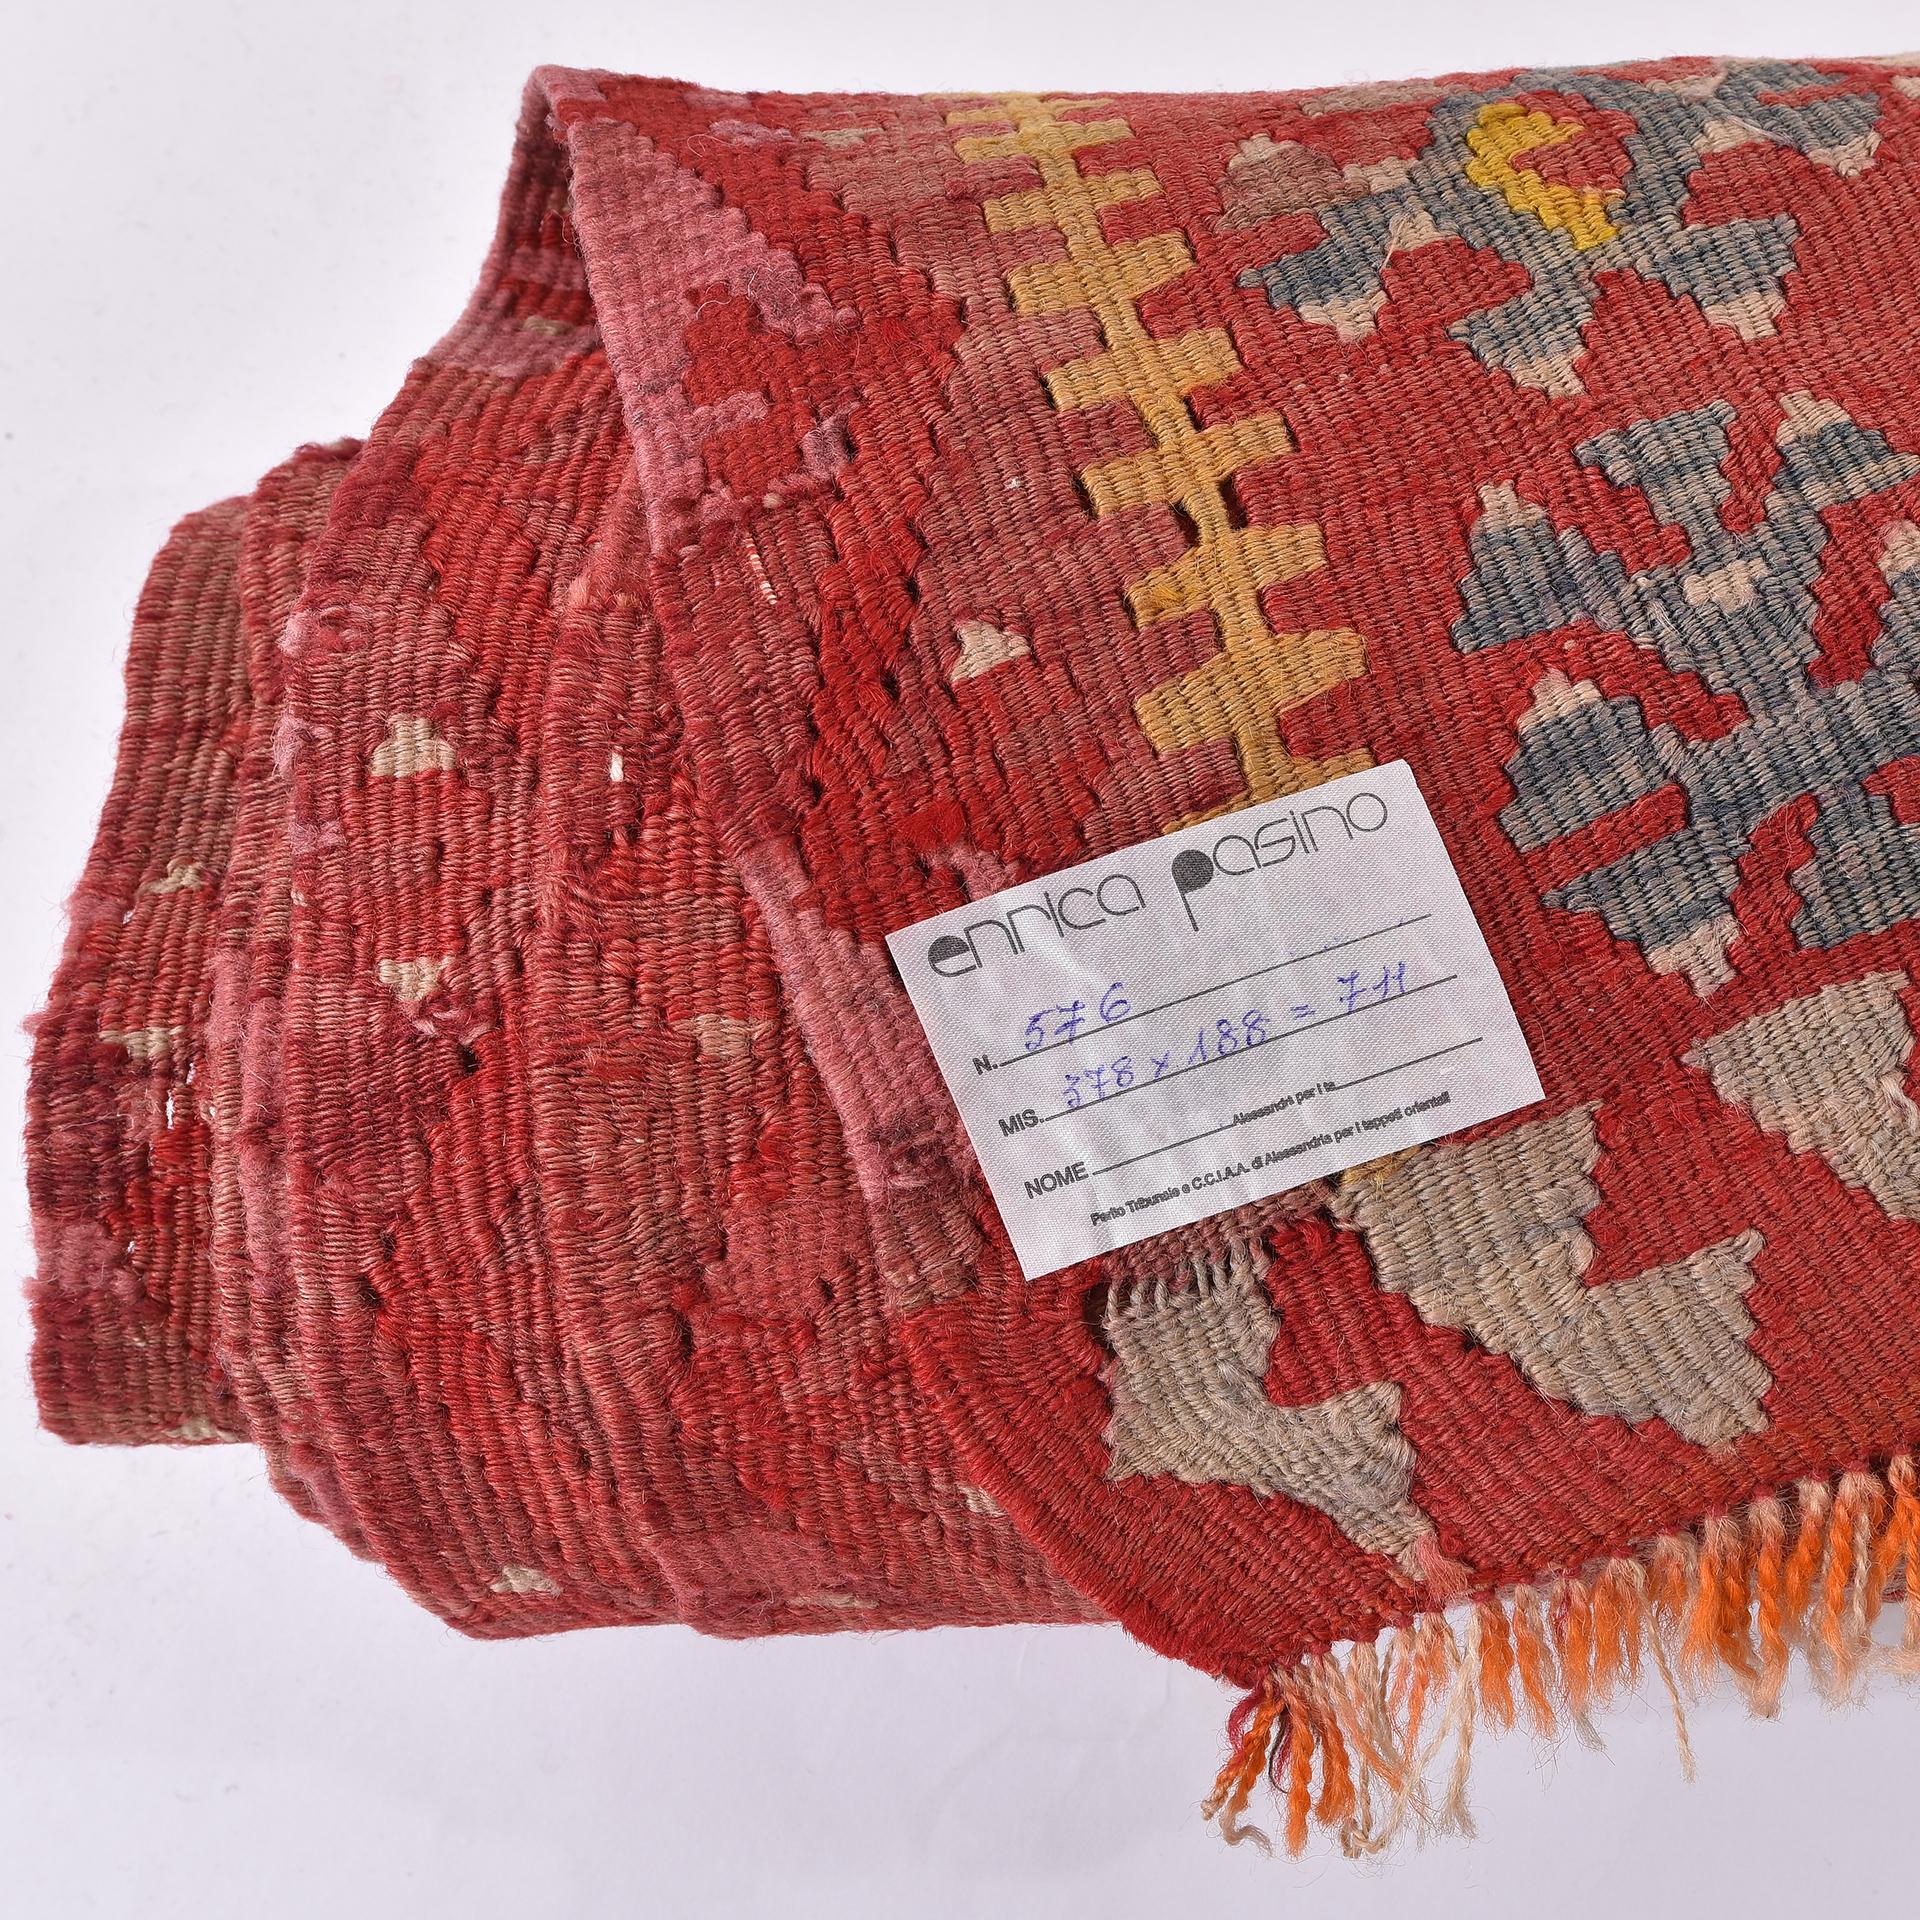 nr. 576 - Large antique Turkish kilim , done in two parts because it was made by nomads,  with unusual striped design and beautiful pastel colors.
Now at an attractive price because I would like to close my business.